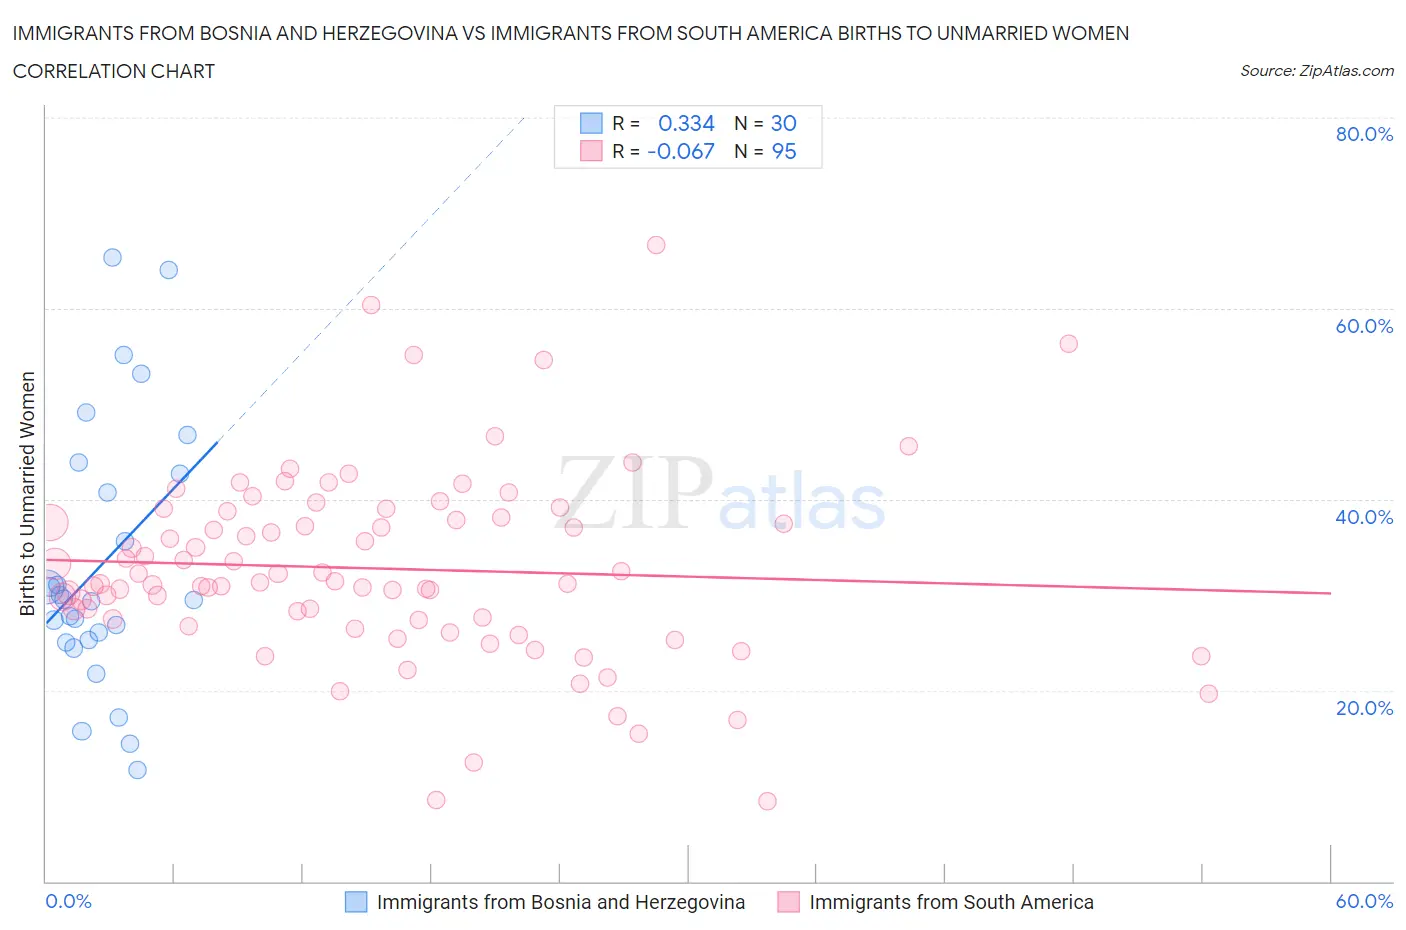 Immigrants from Bosnia and Herzegovina vs Immigrants from South America Births to Unmarried Women